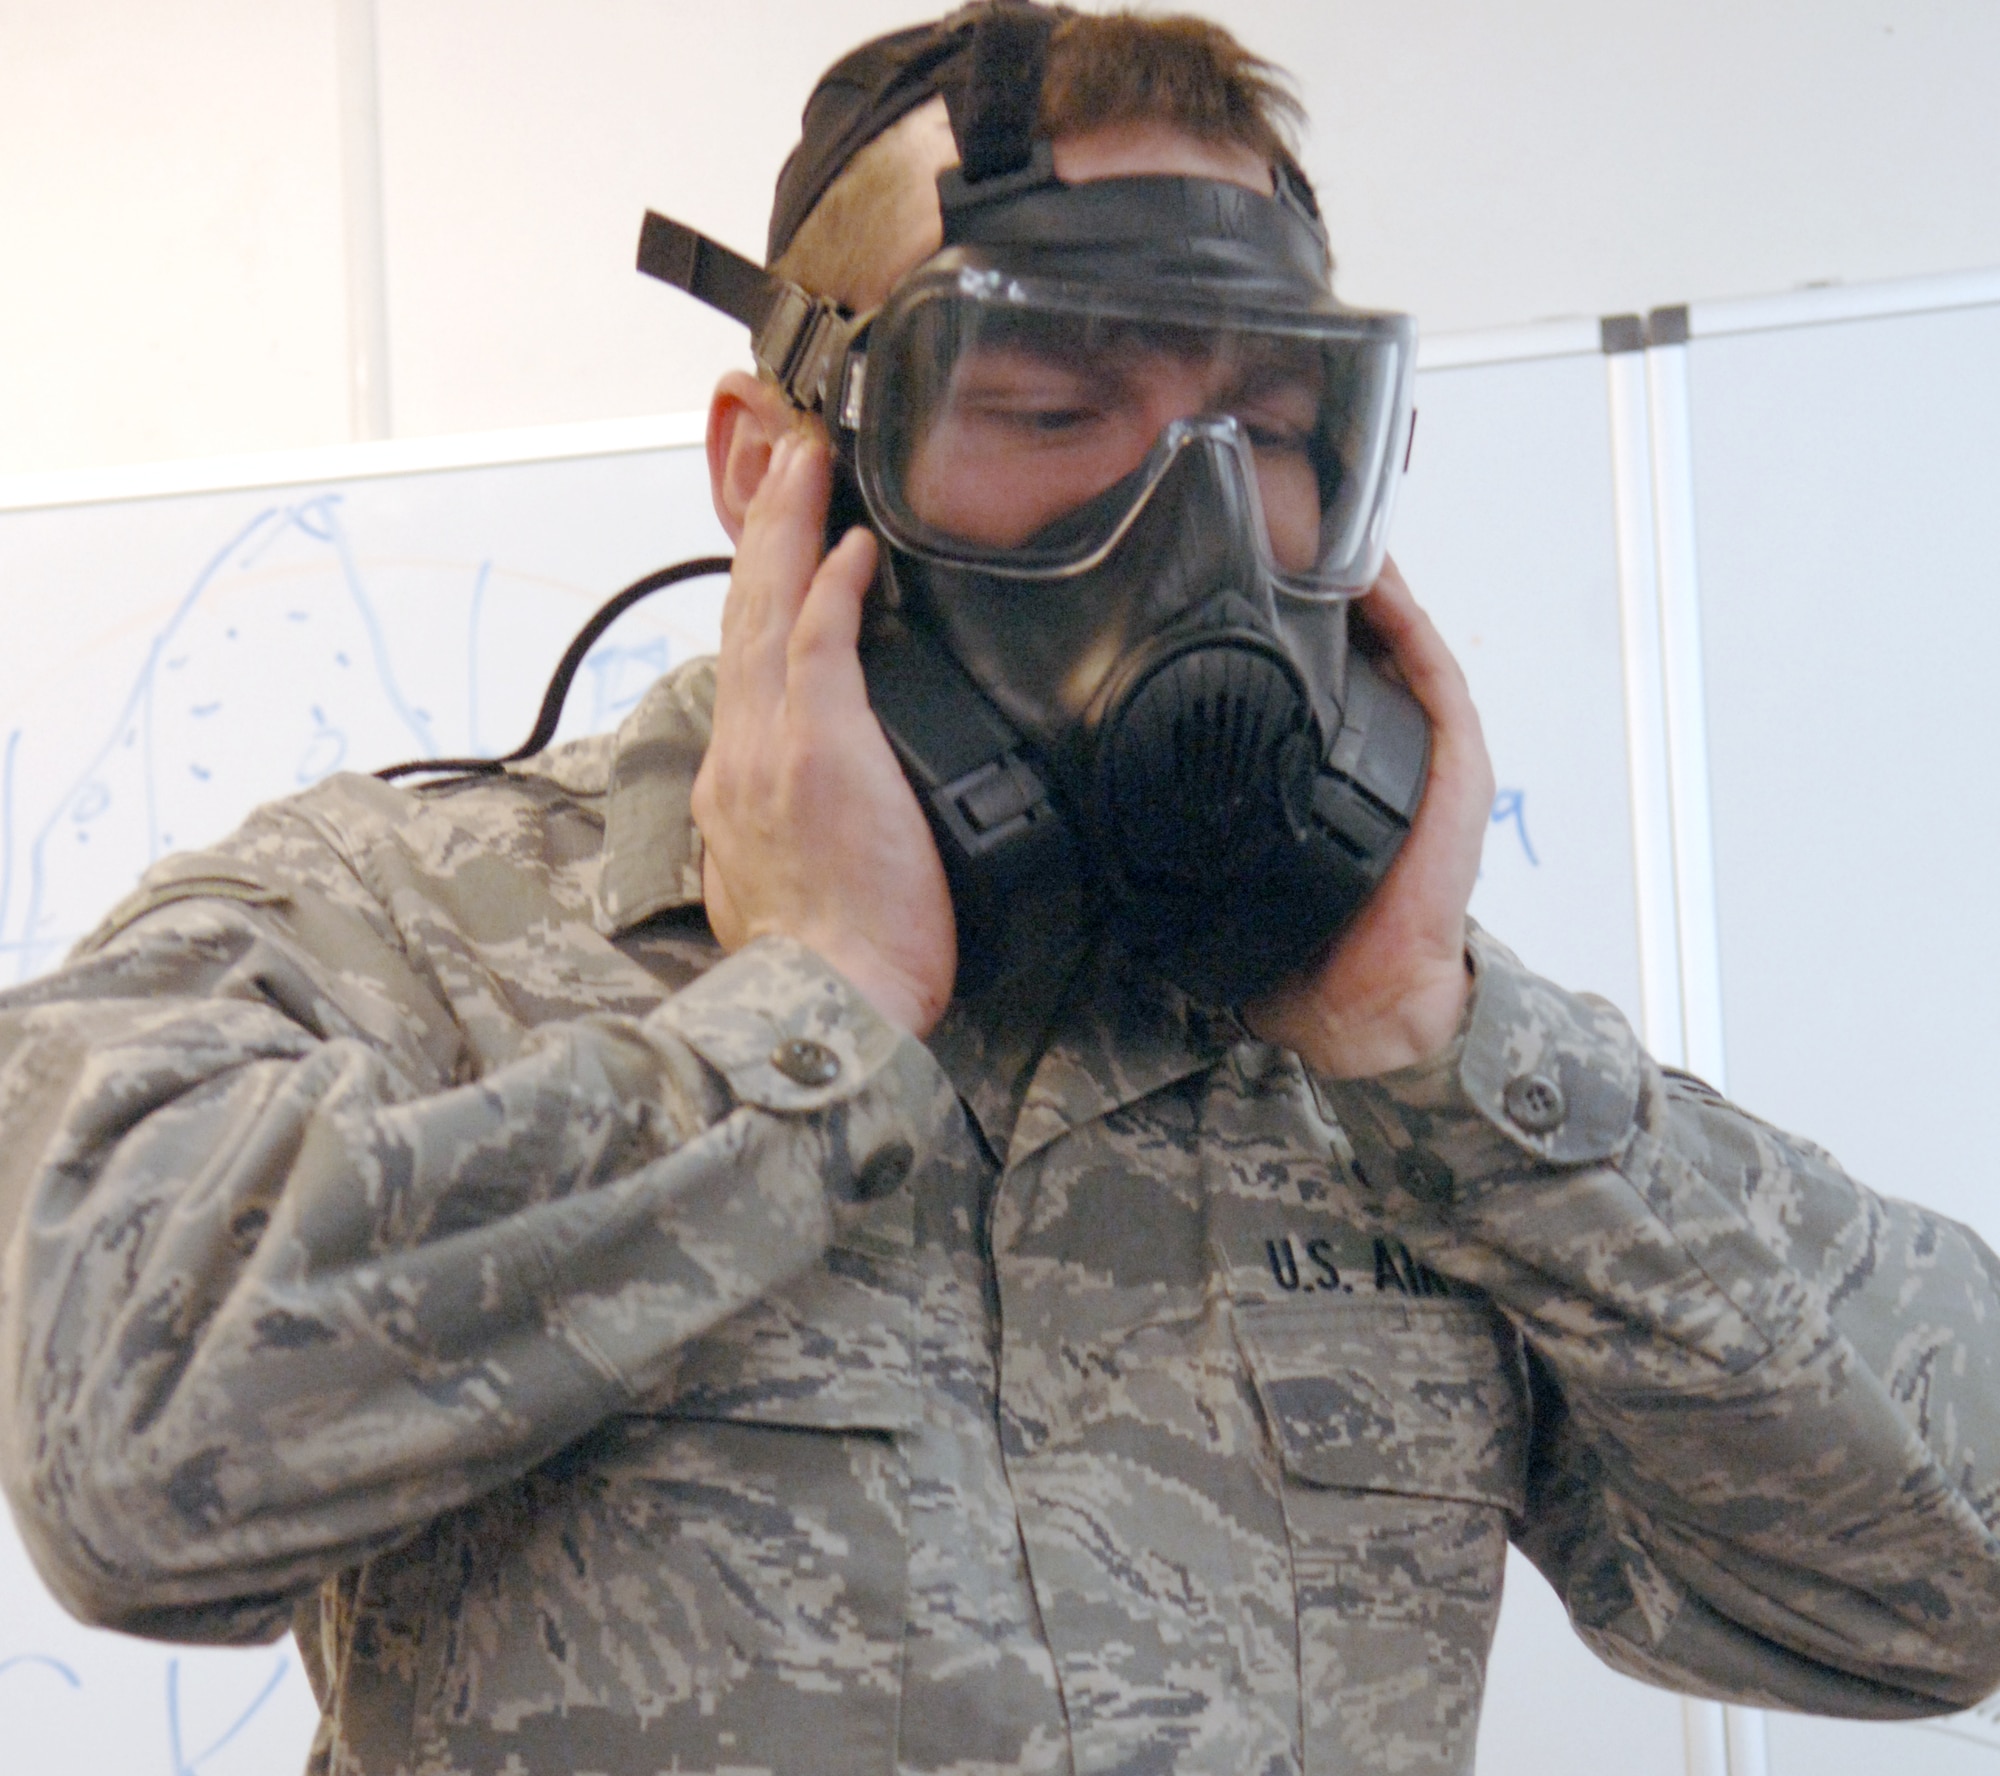 U.S. Air Force Airman 1st Class Michael Balbaugh, 886th Civil Engineer Squadron readiness and emergency management apprentice, demonstrates how to check the seal of the M-50 Joint Service General Purpose Mask, Nov. 5, 2009, Ramstein Air Base, Germany. The mask has two filters as opposed to the one canister filter on the MCU-2 mask.  (U.S. Air Force photo by Senior Airman Amanda Dick)